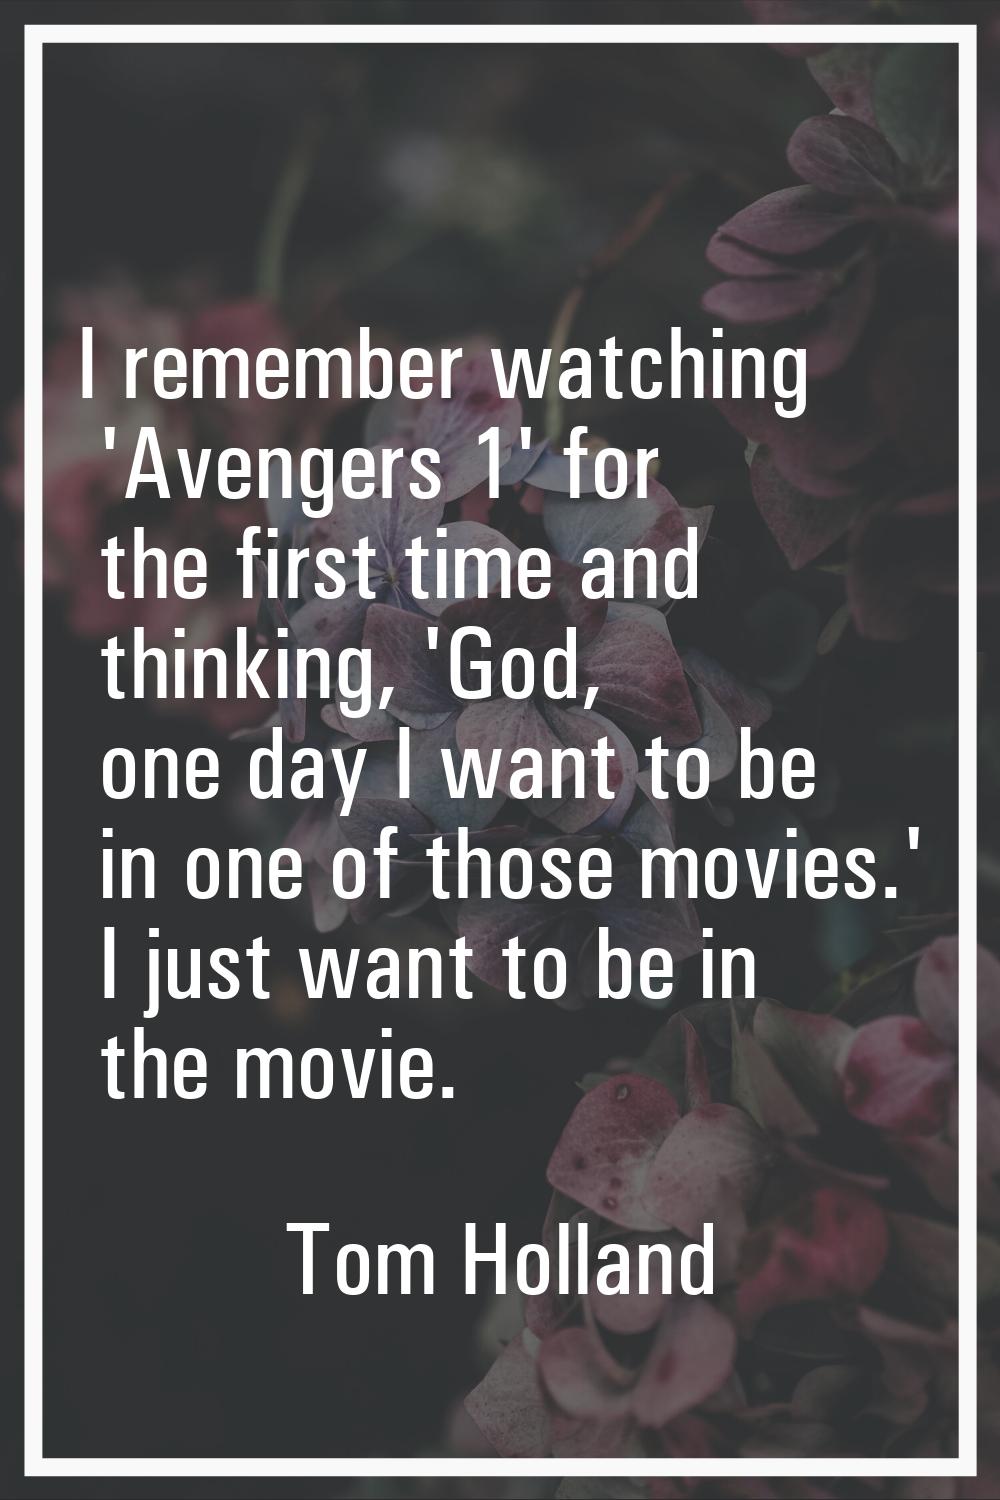 I remember watching 'Avengers 1' for the first time and thinking, 'God, one day I want to be in one